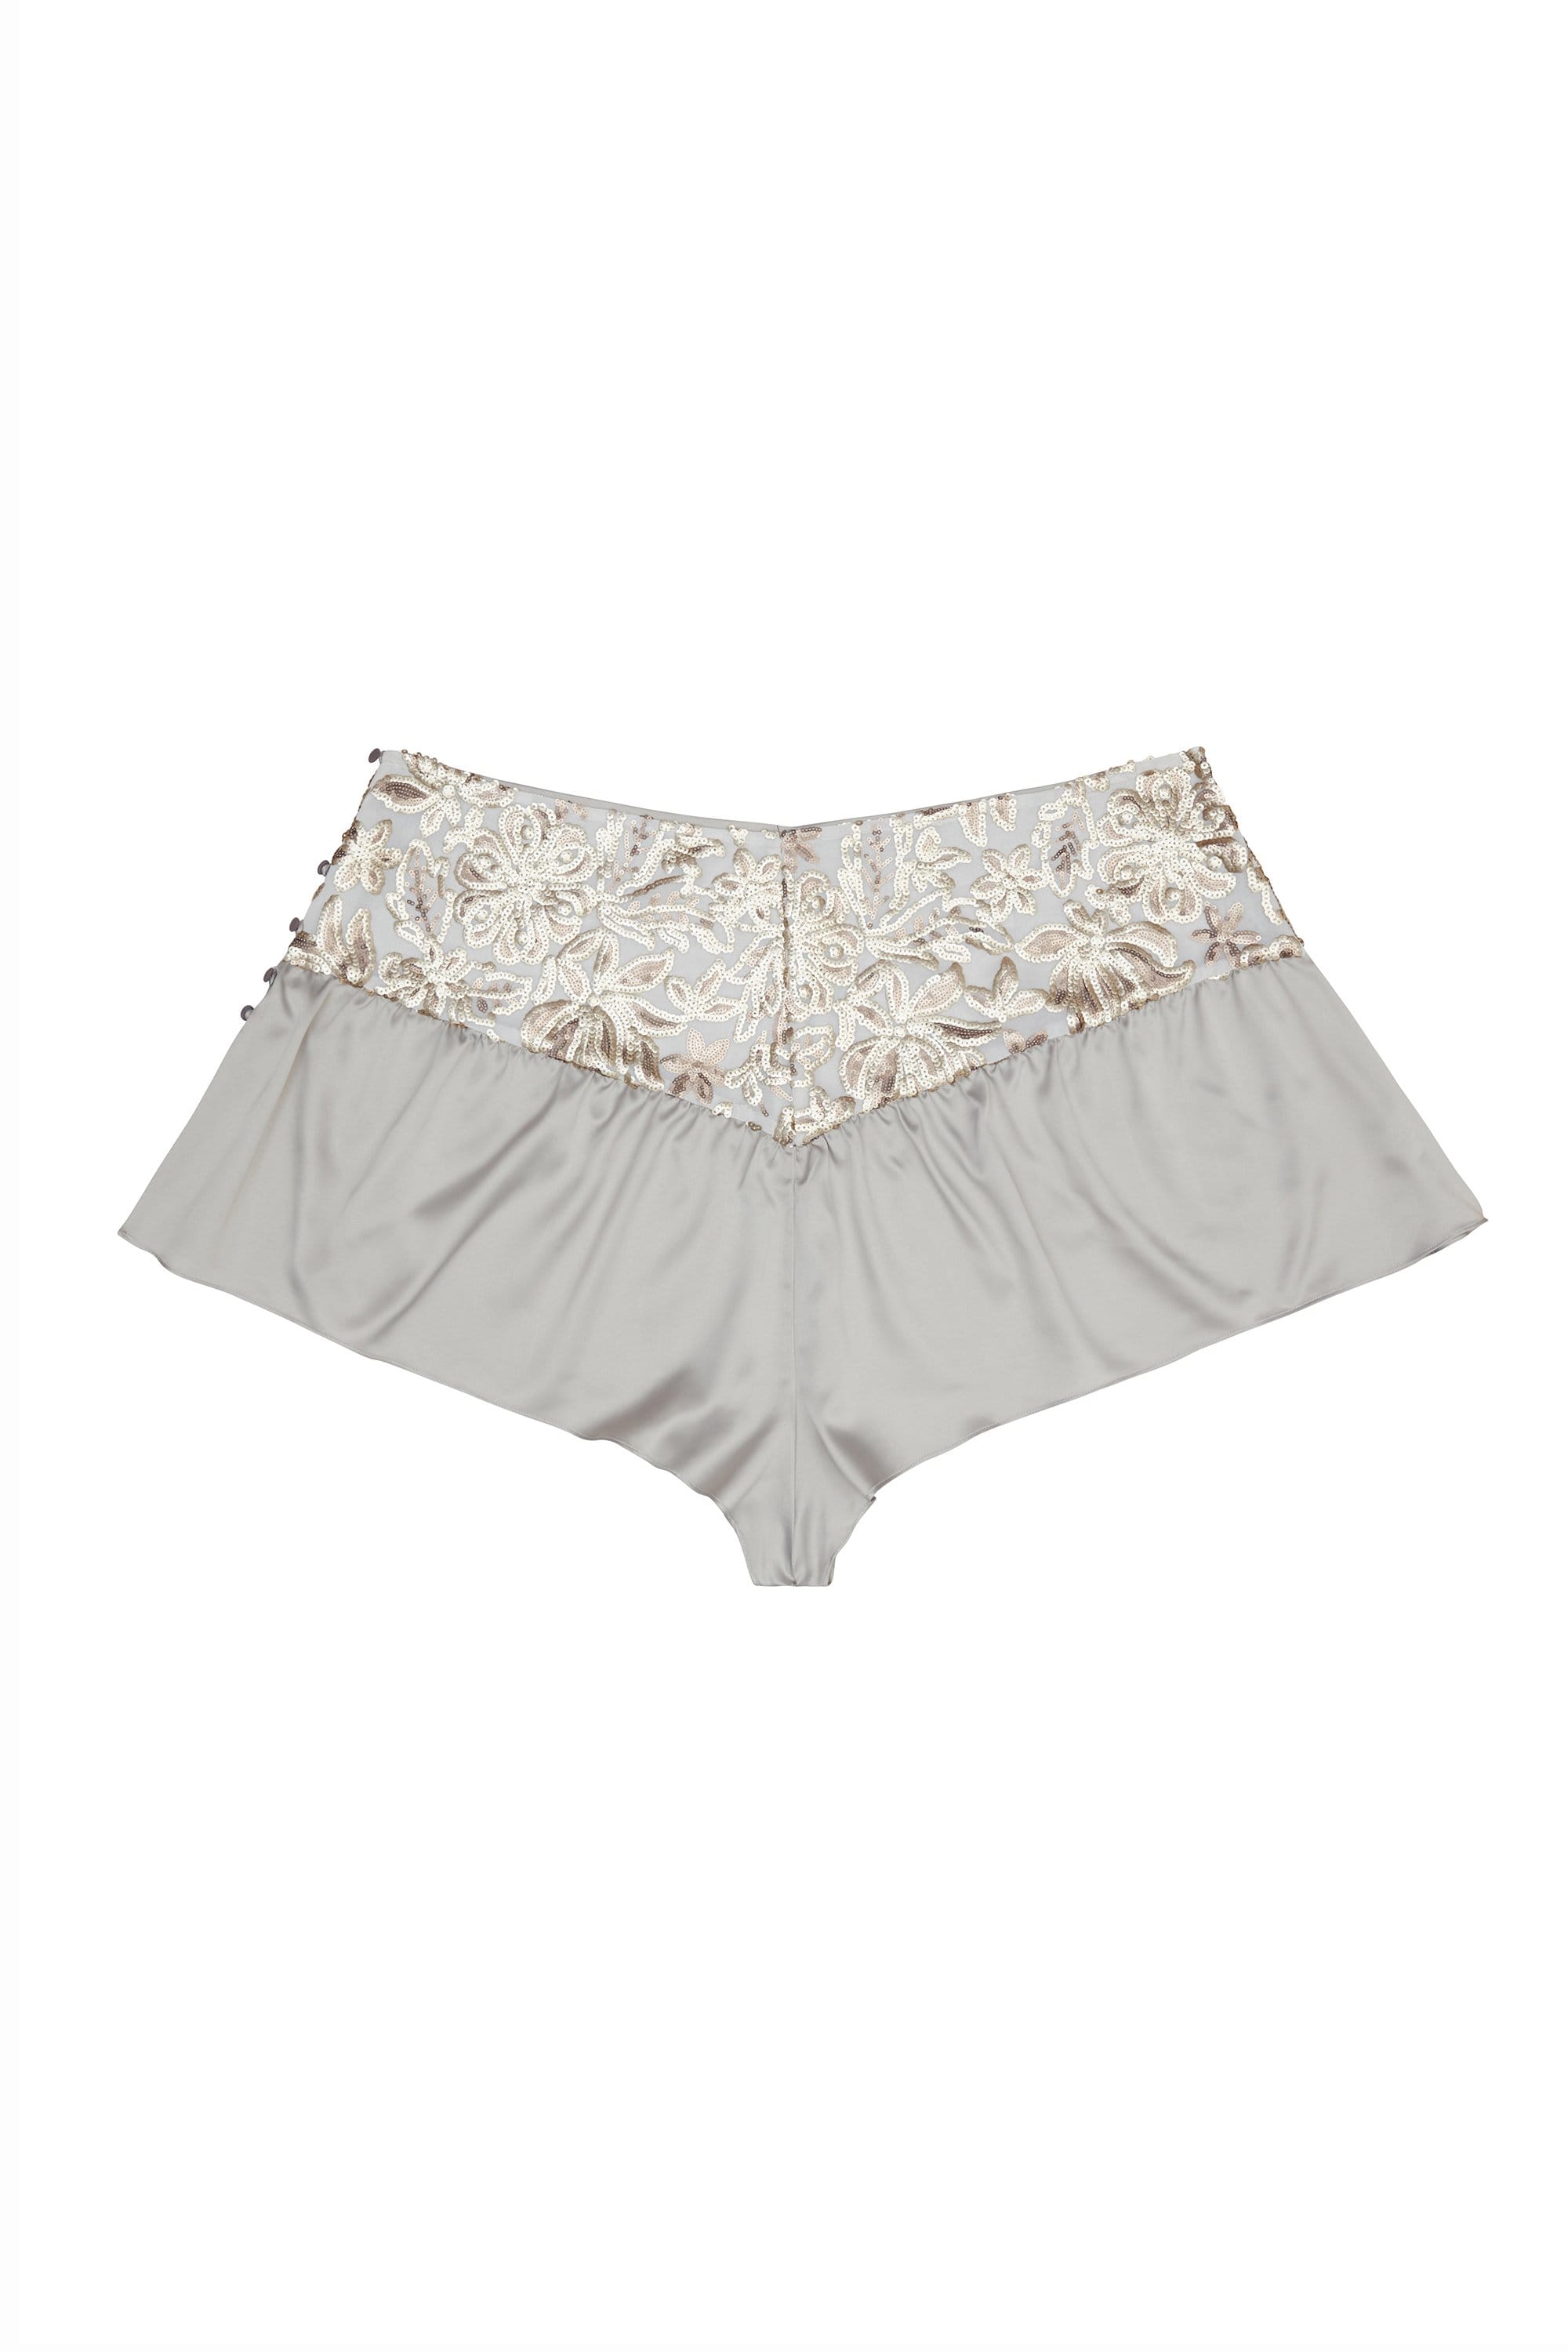 FFFB Sequin french knicker curve